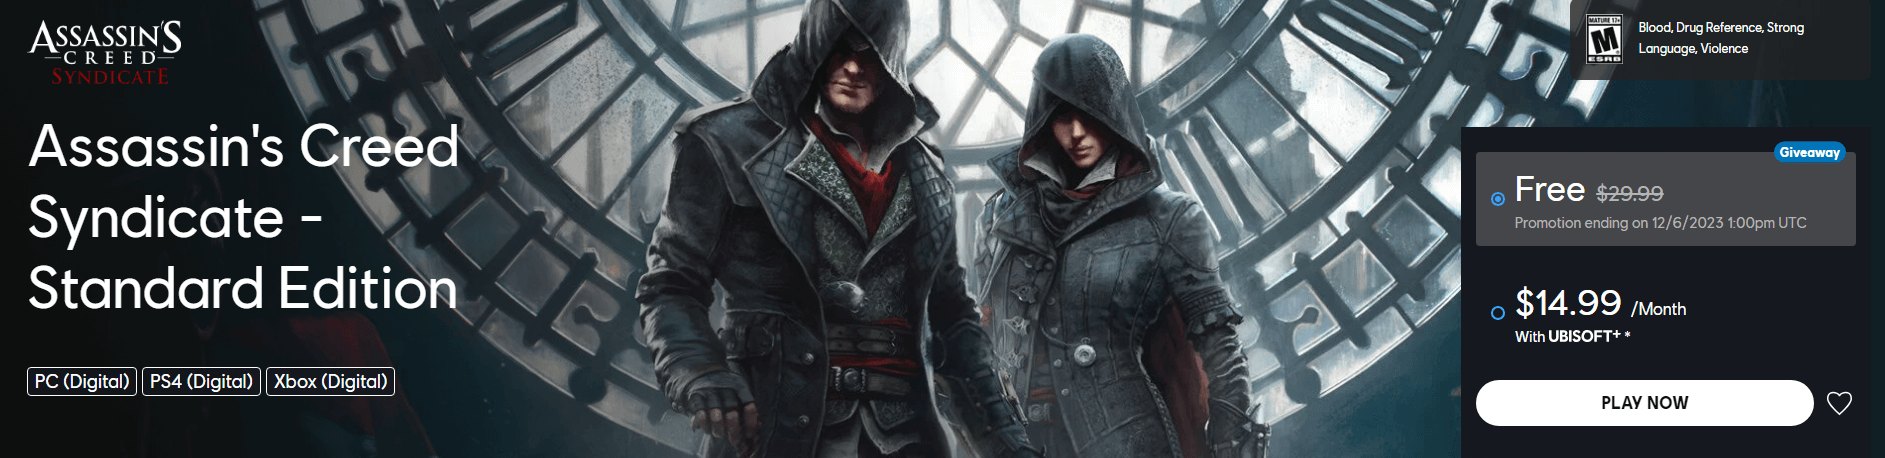 Assassin's Creed Syndicate for Free